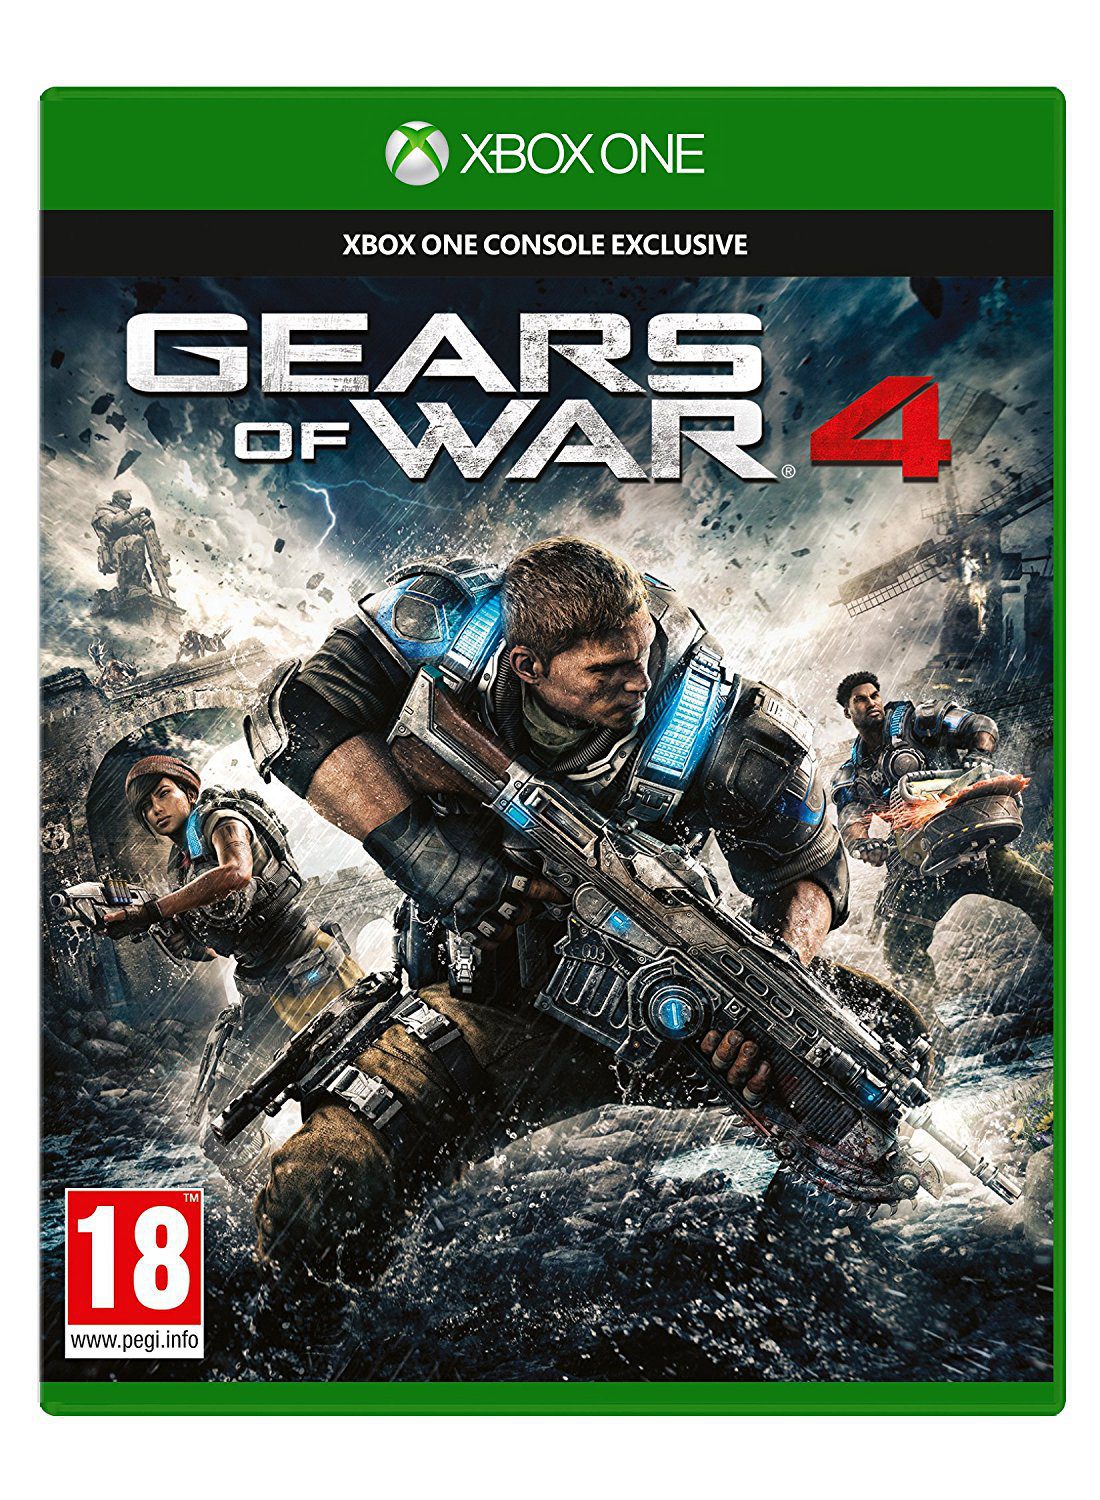 download free xbox one s gears of war 4